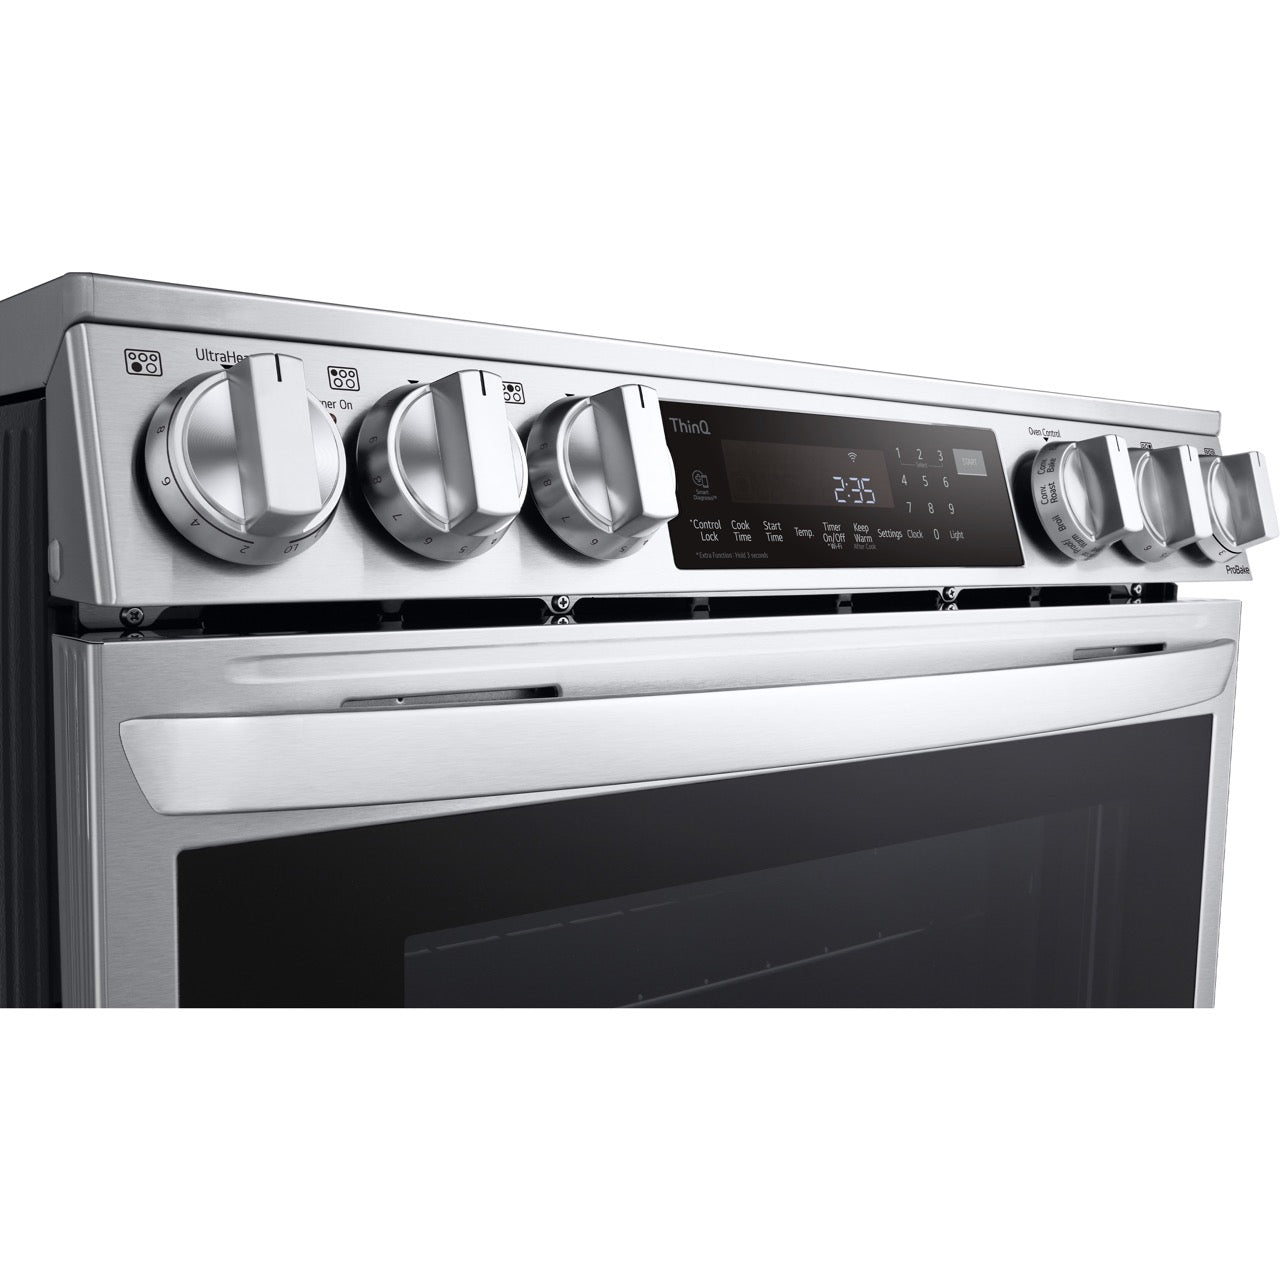 LG 6.3-Cu. Ft. Smart Wi-Fi Enabled ProBake Convection InstaView Electric Slide-in Range with Air Fry, Stainless Steel (LSEL6335F)